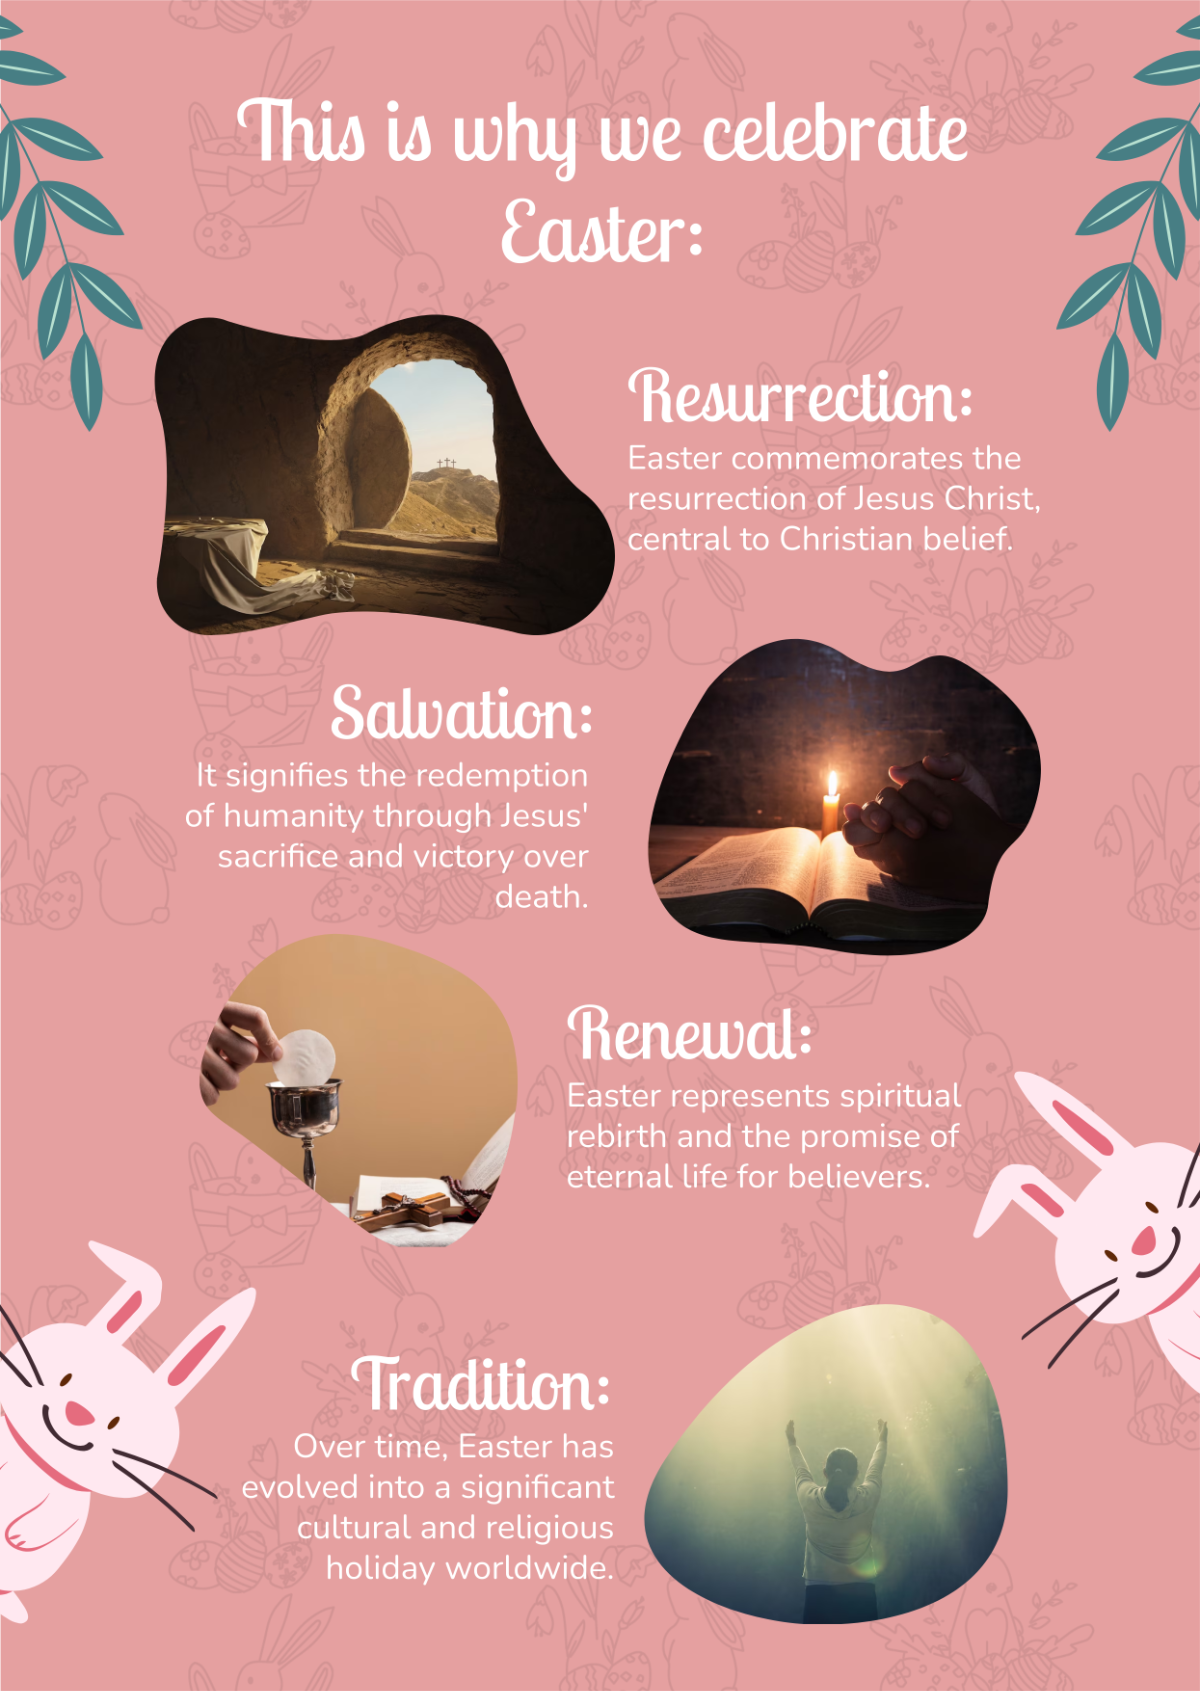 Why do we celebrate Easter? Template